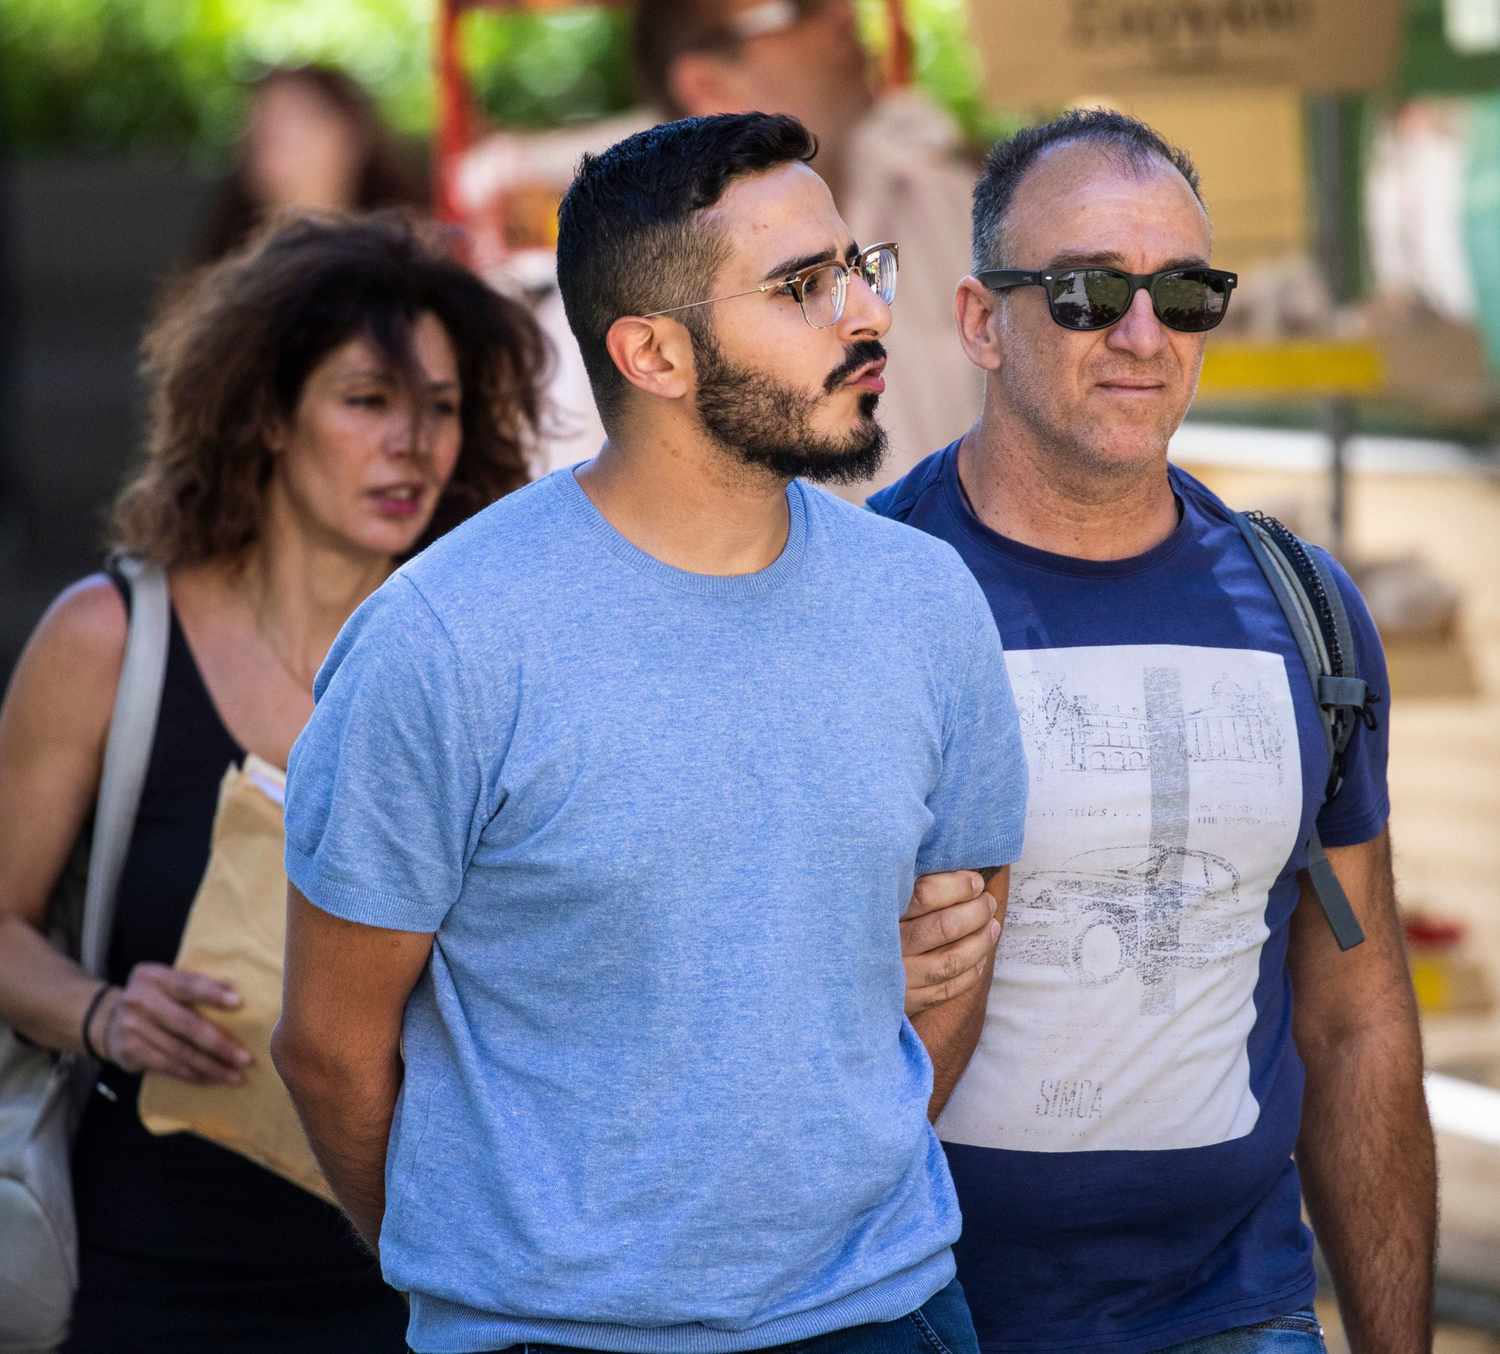 Picture taken on July 1, 2019 shows the so-called "Tinder swindler" (L) as he is expelled from the city of Athens, Greece. -